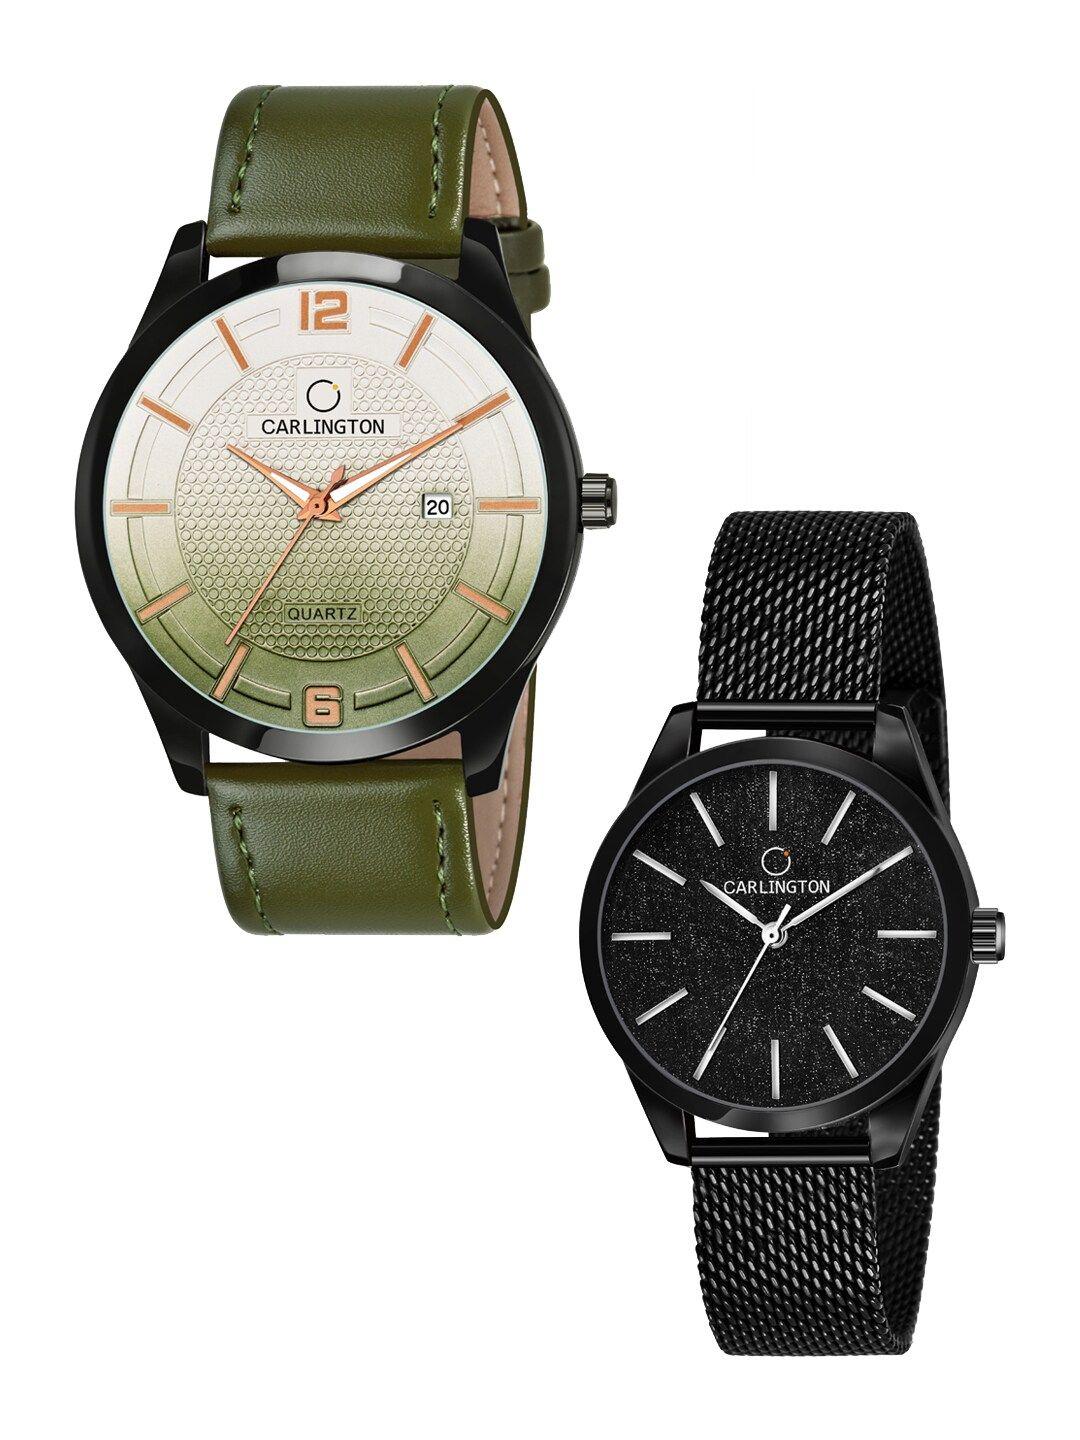 carlington his & her watch gift set combo combo ct1010 green - ct2001 black